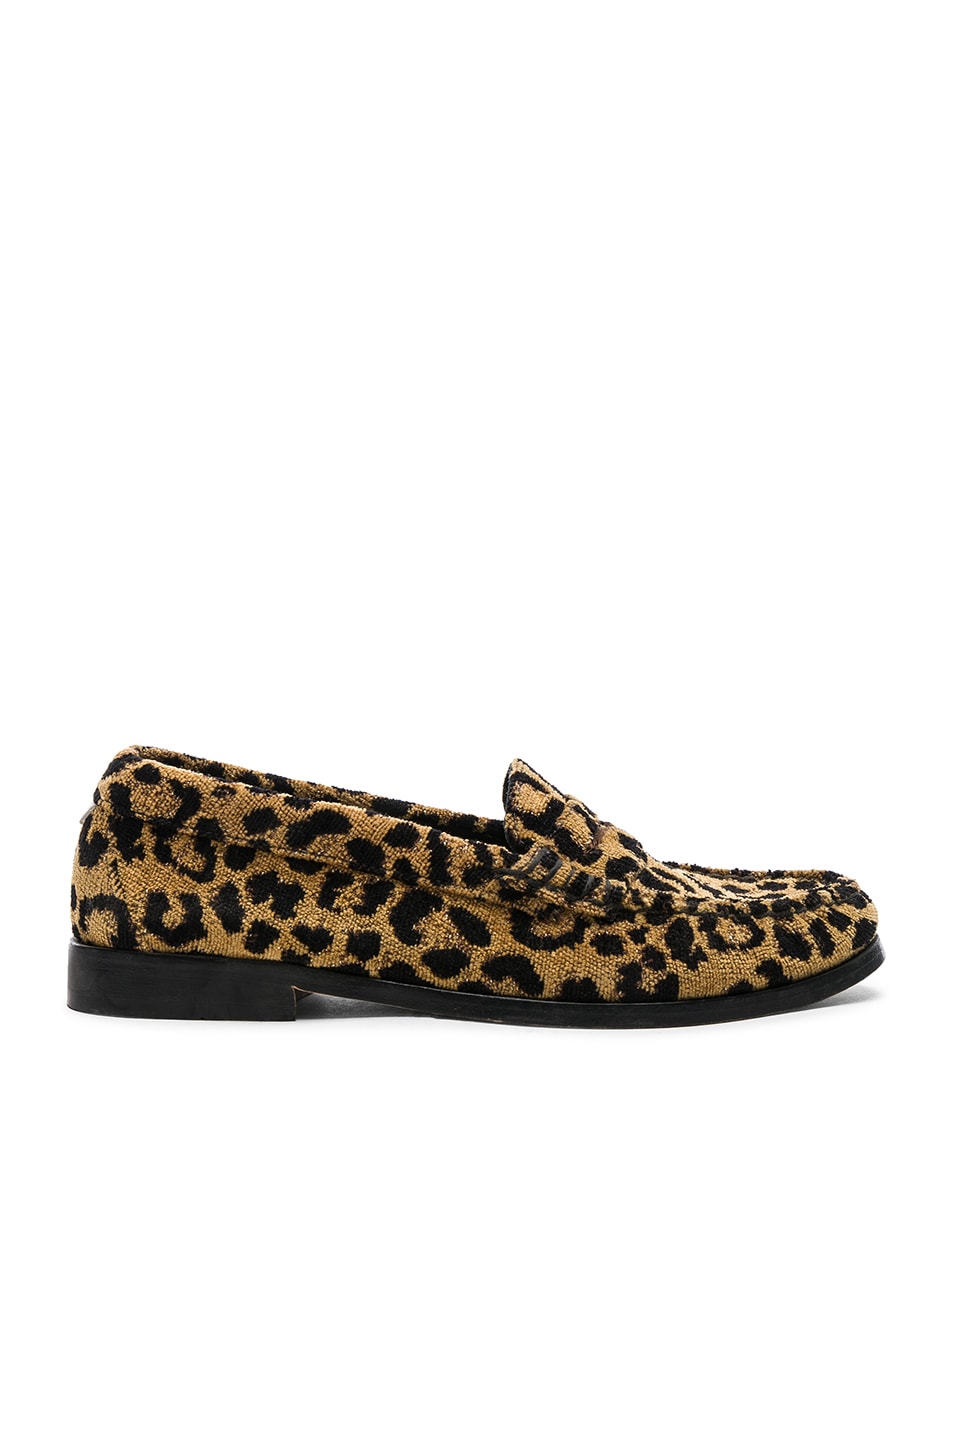 Image 1 of RE/DONE x G.H. Bass & Co. Whitney Loafer in Leopard Textile